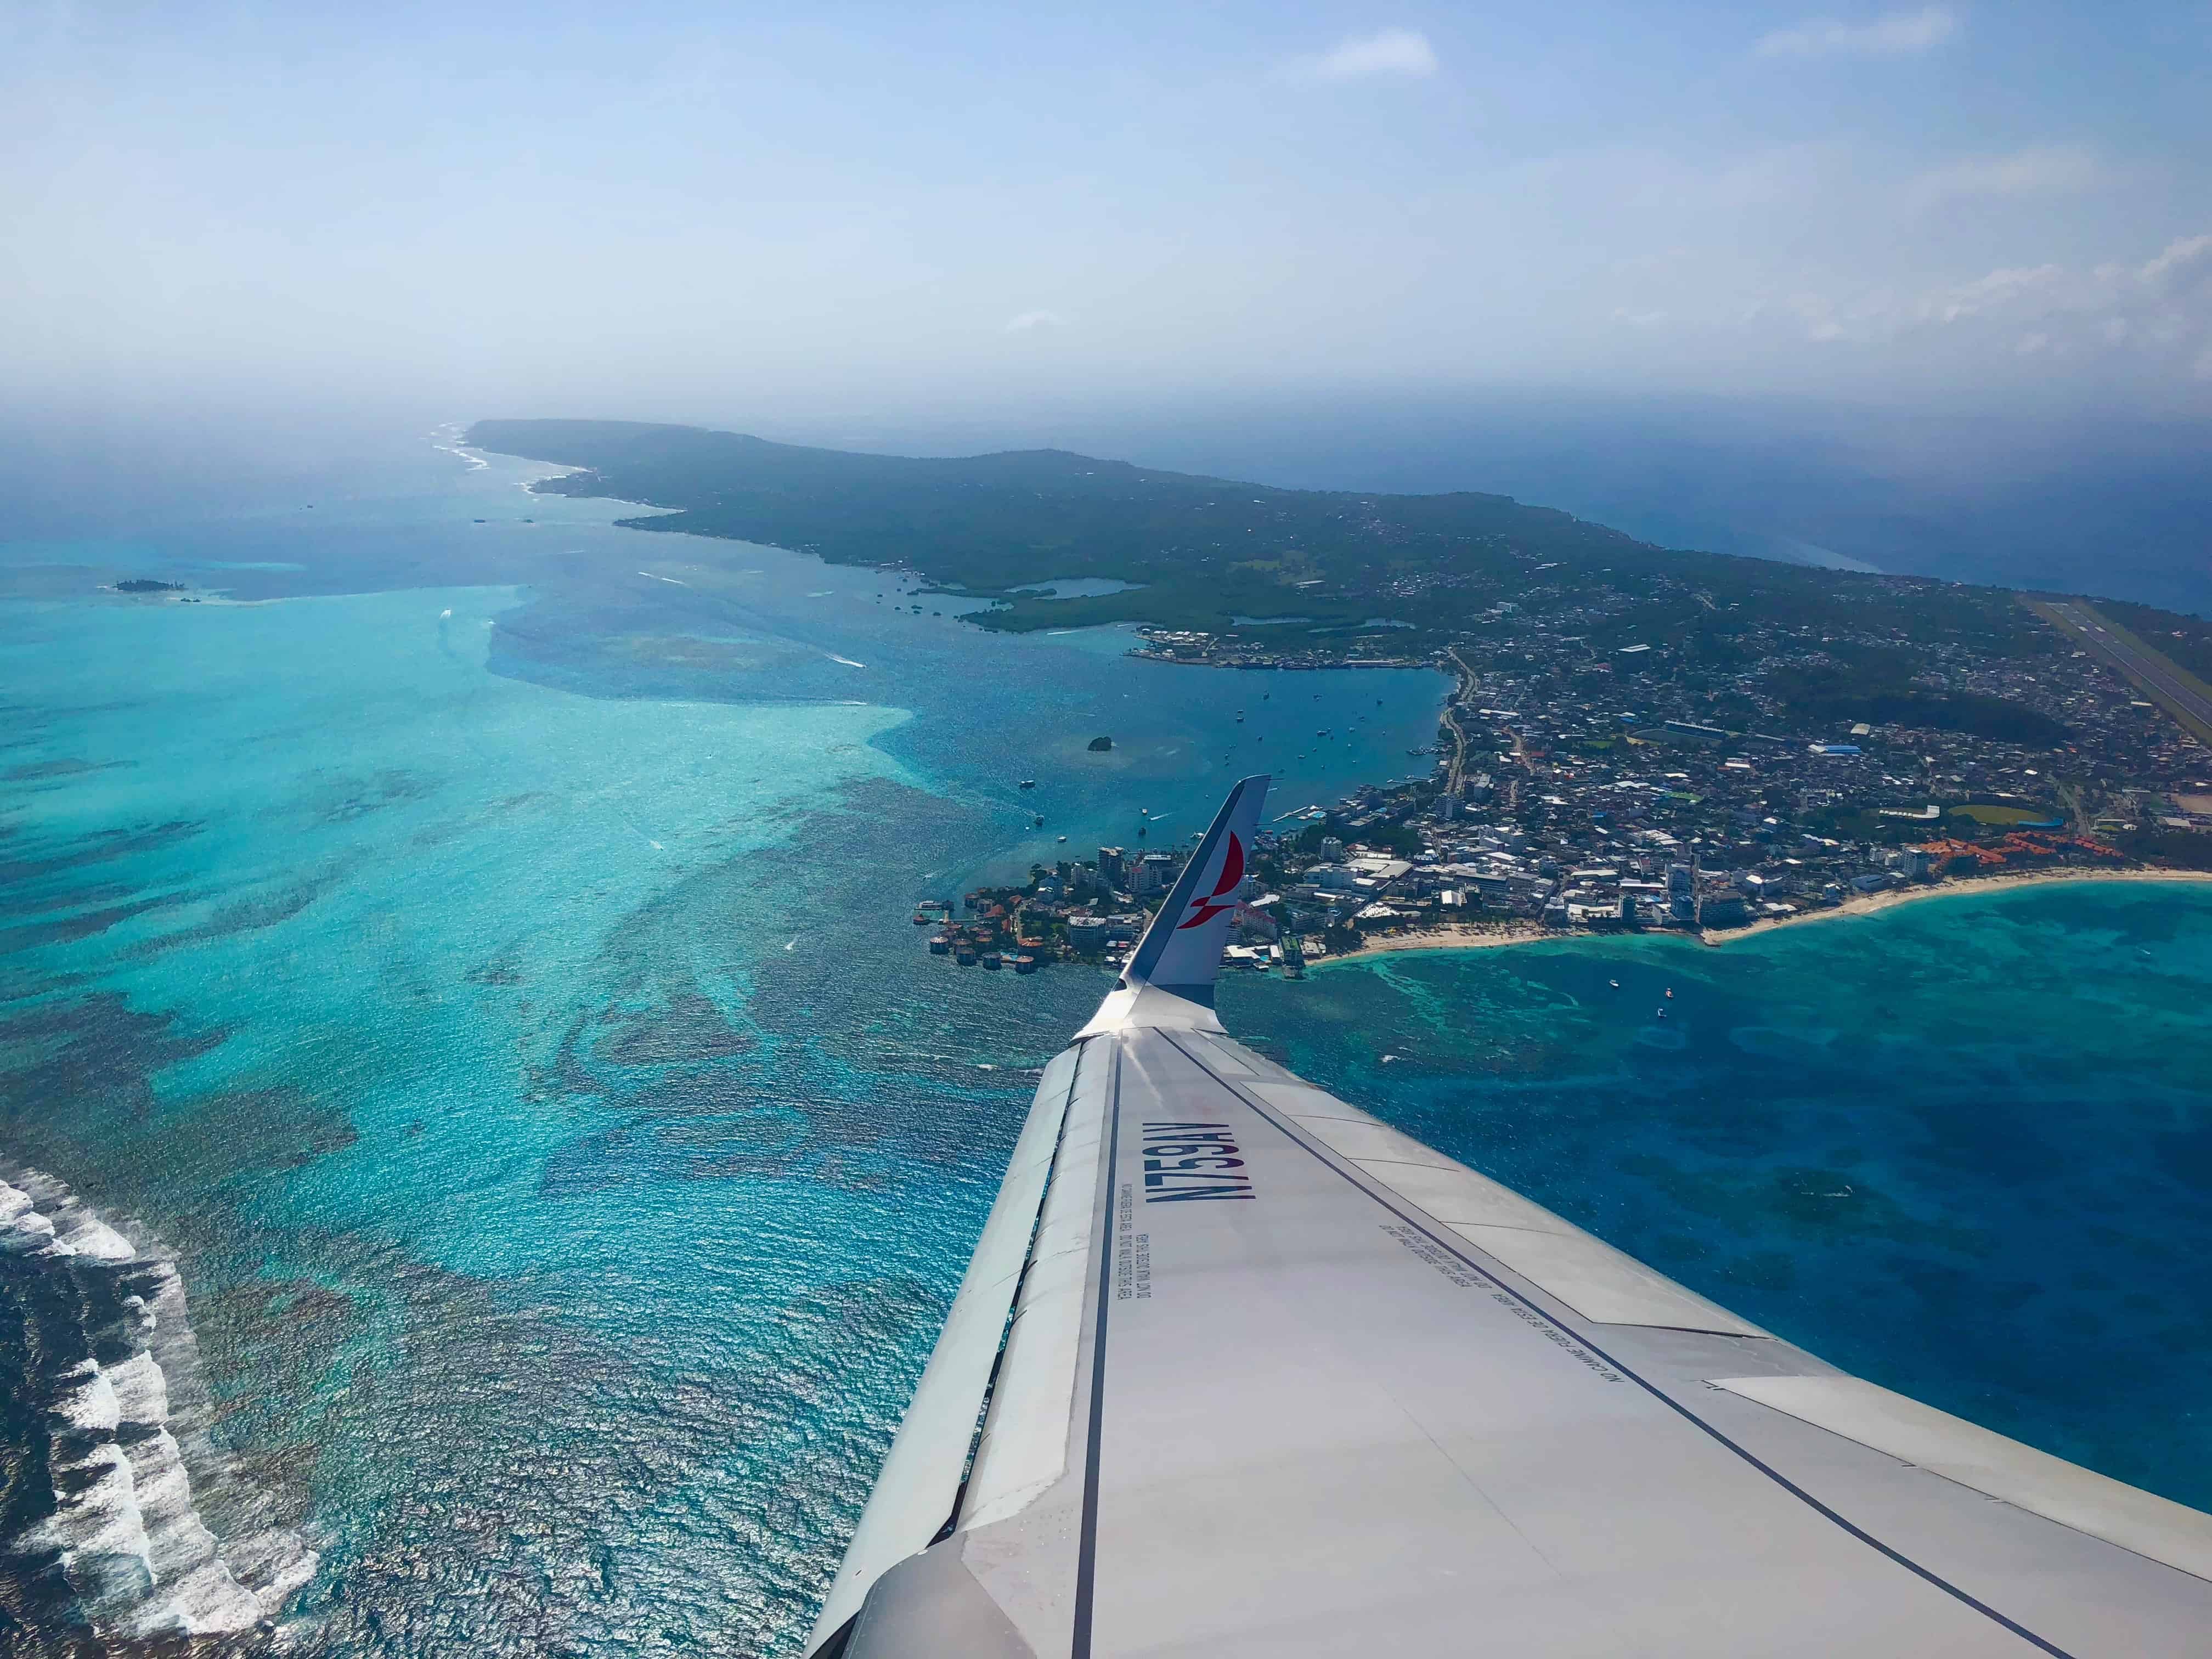 Taking off from San Andrés, Colombia